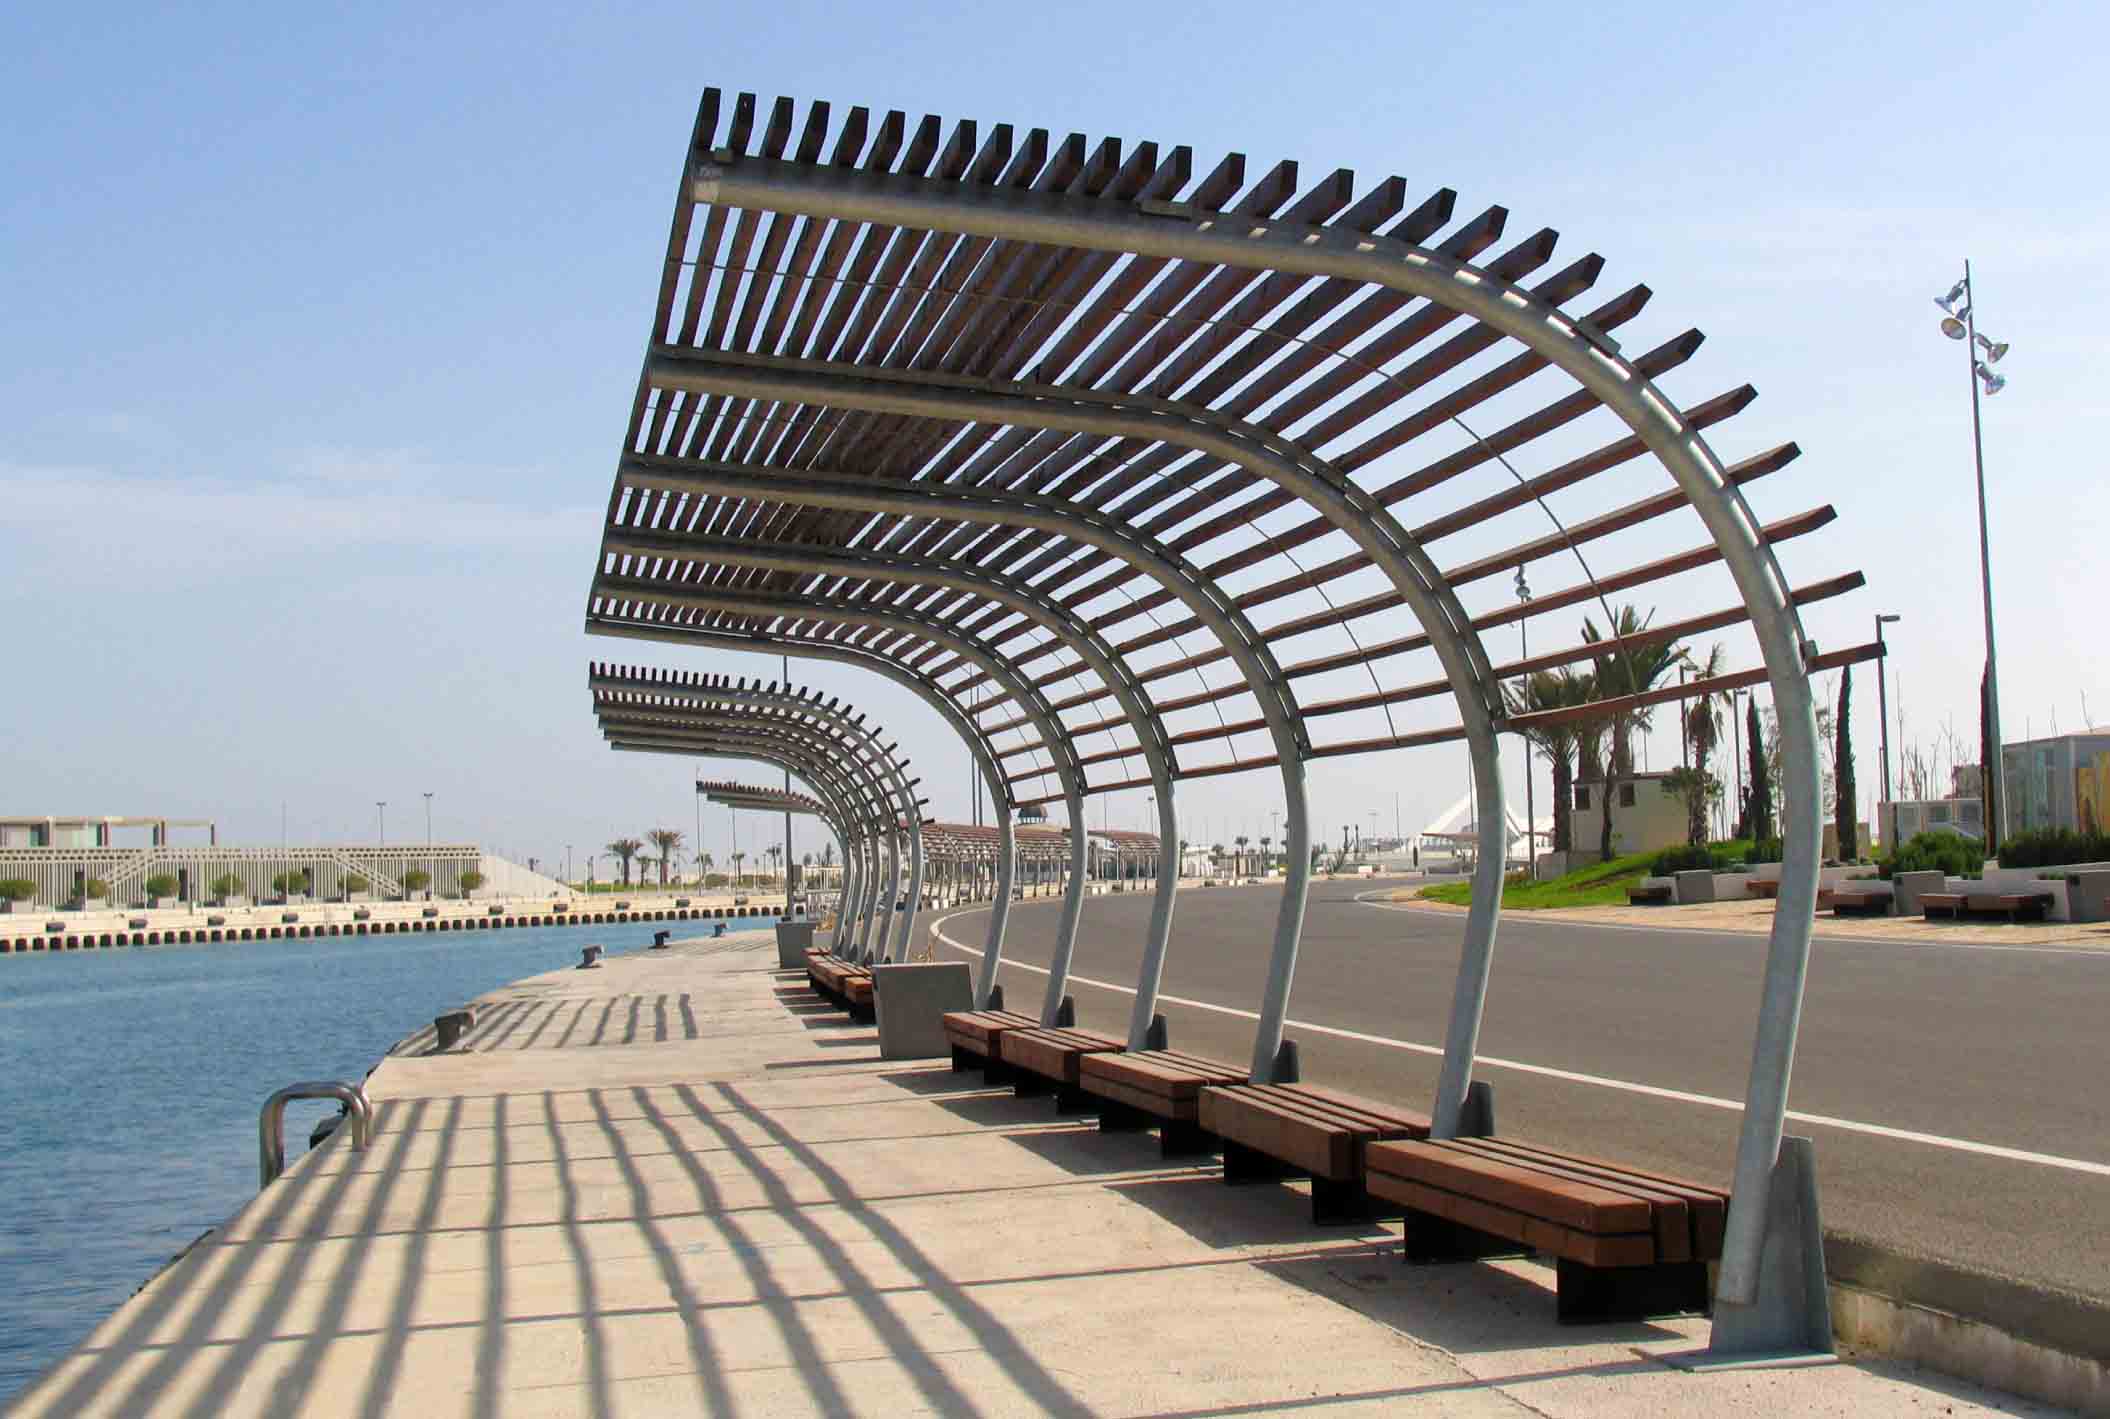 - Pergola of wood and steel closed to the sea